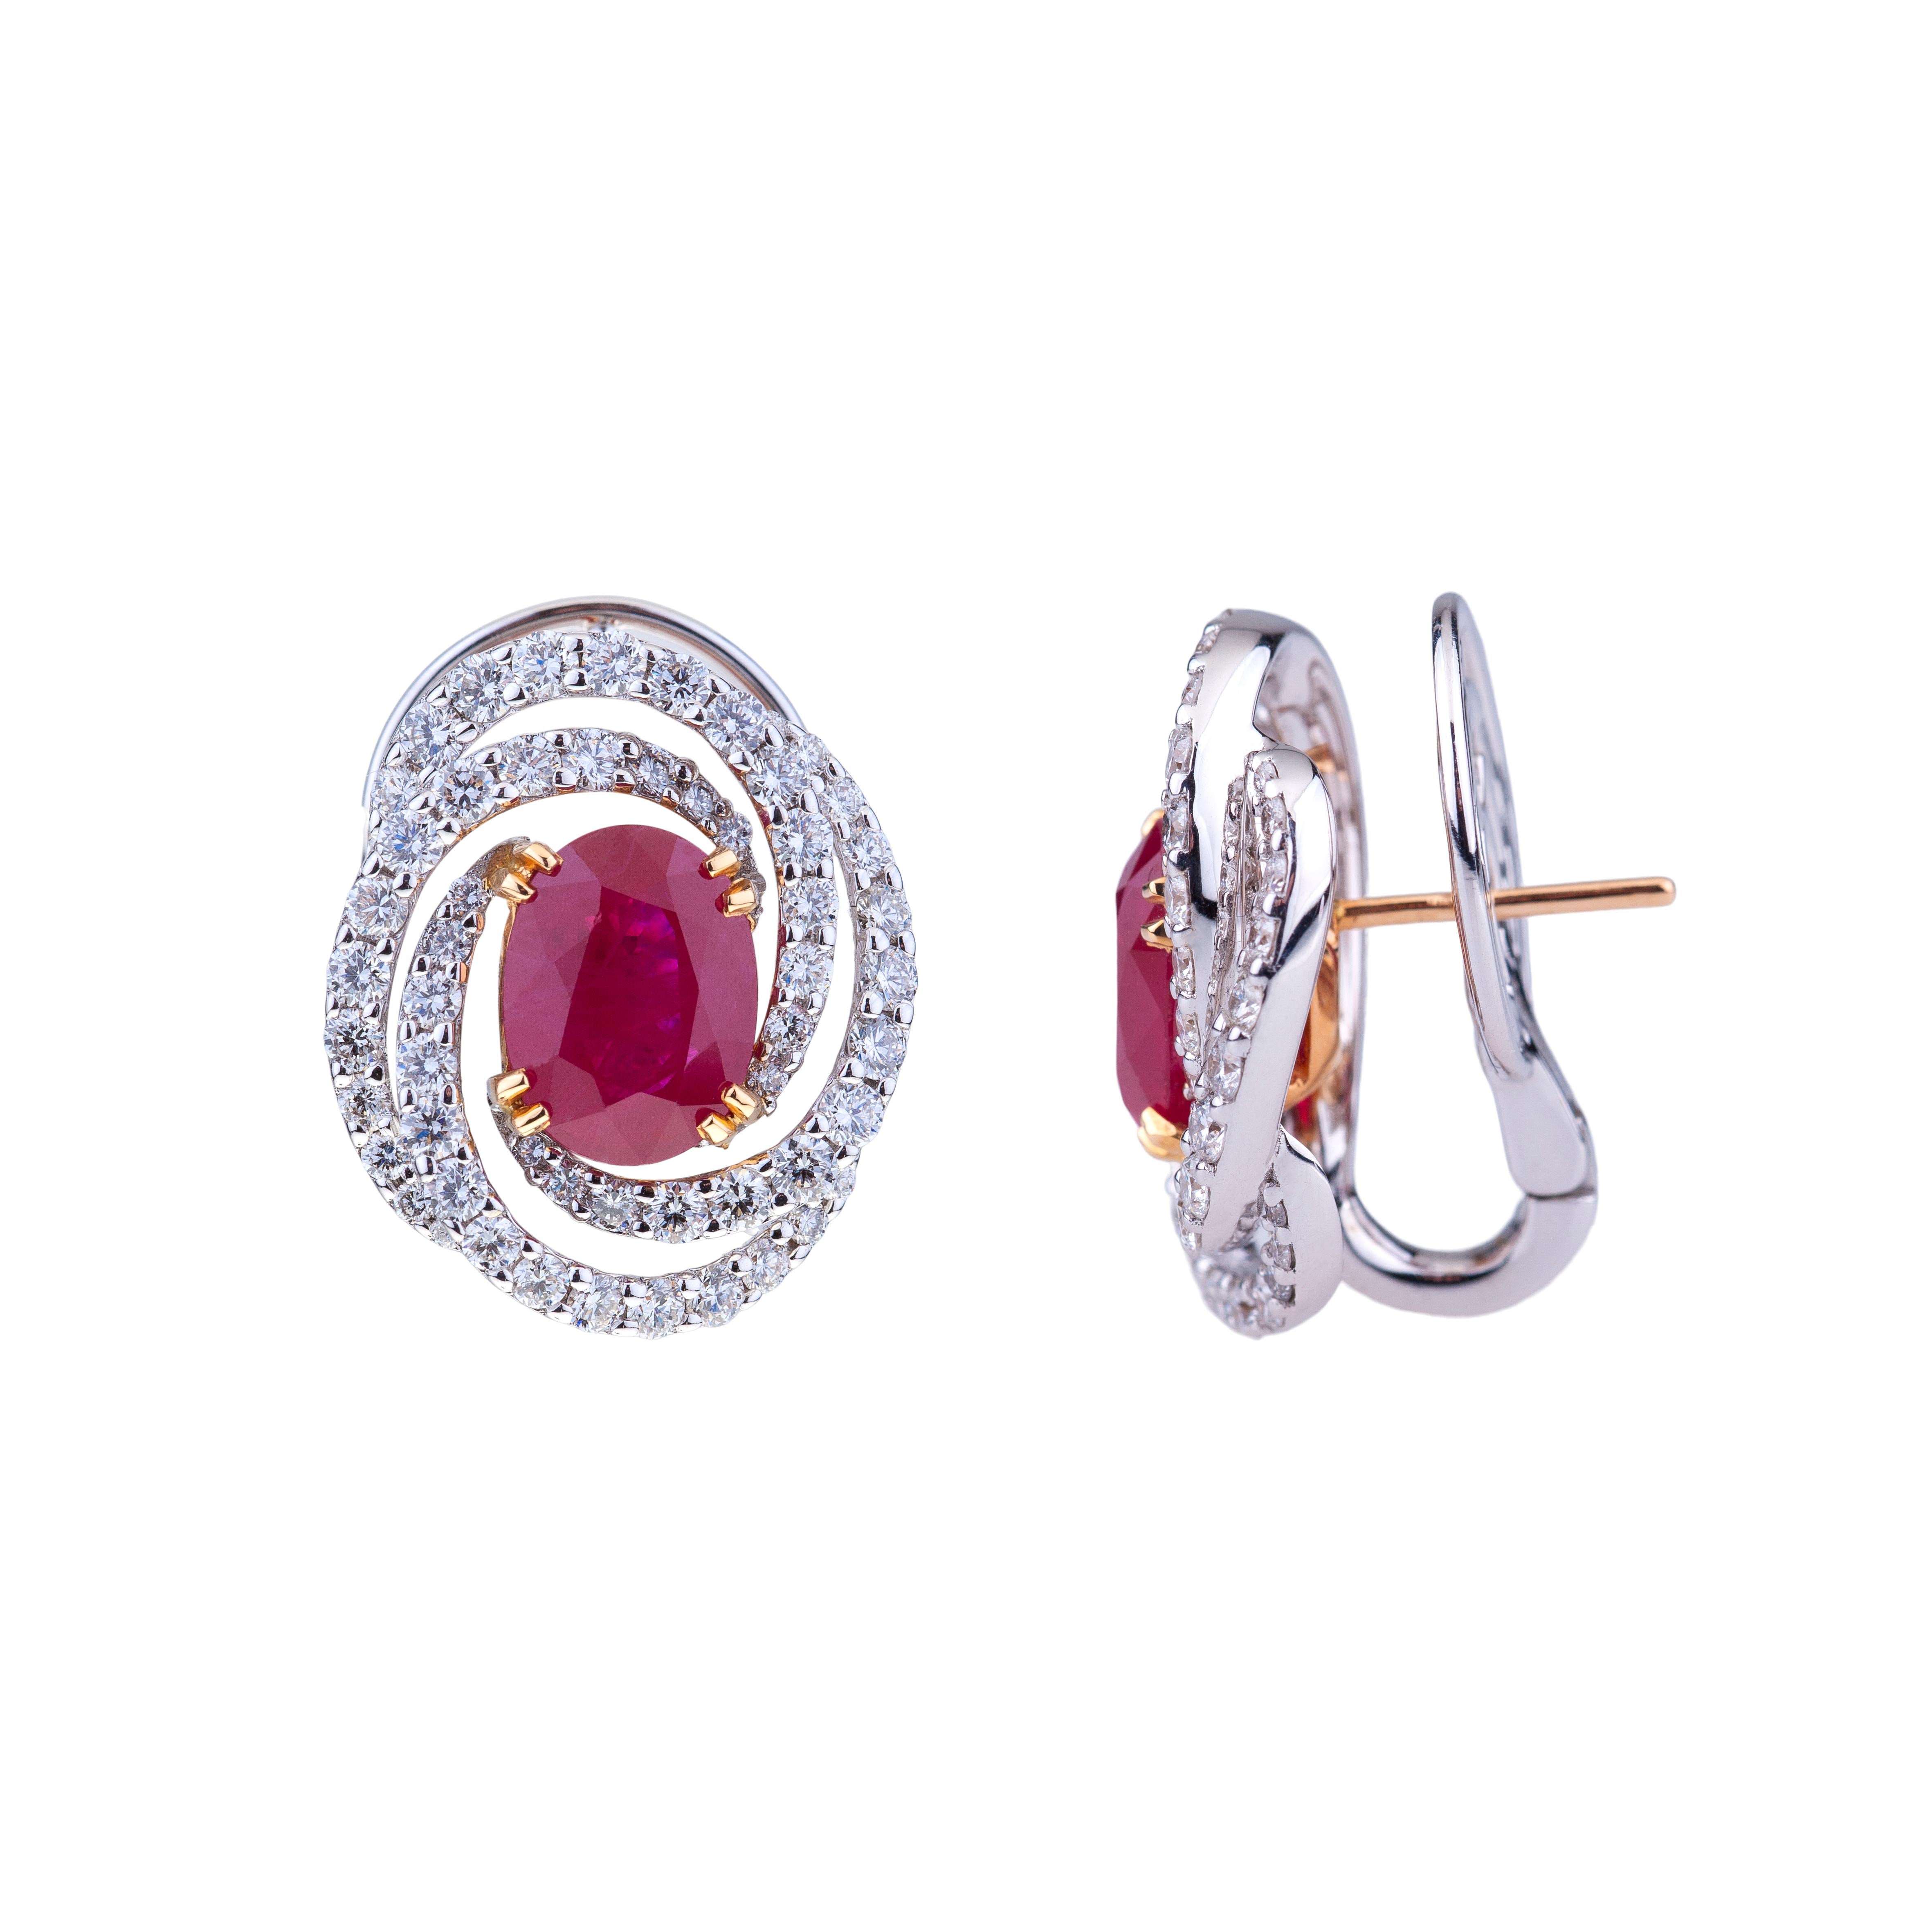 Ruby 3 ct. Each Earrings White Gold with Circle of Diamonds, with Certificate.
Contemporary Design for this Earrings with a Pair of Stunning Intense Red Ruby:
ct. 3.04 size 9.33X7.21X5.29 (cert. n. 17110689) + ct. 3.01 size 9.66X7.26X4.84 (cert n.